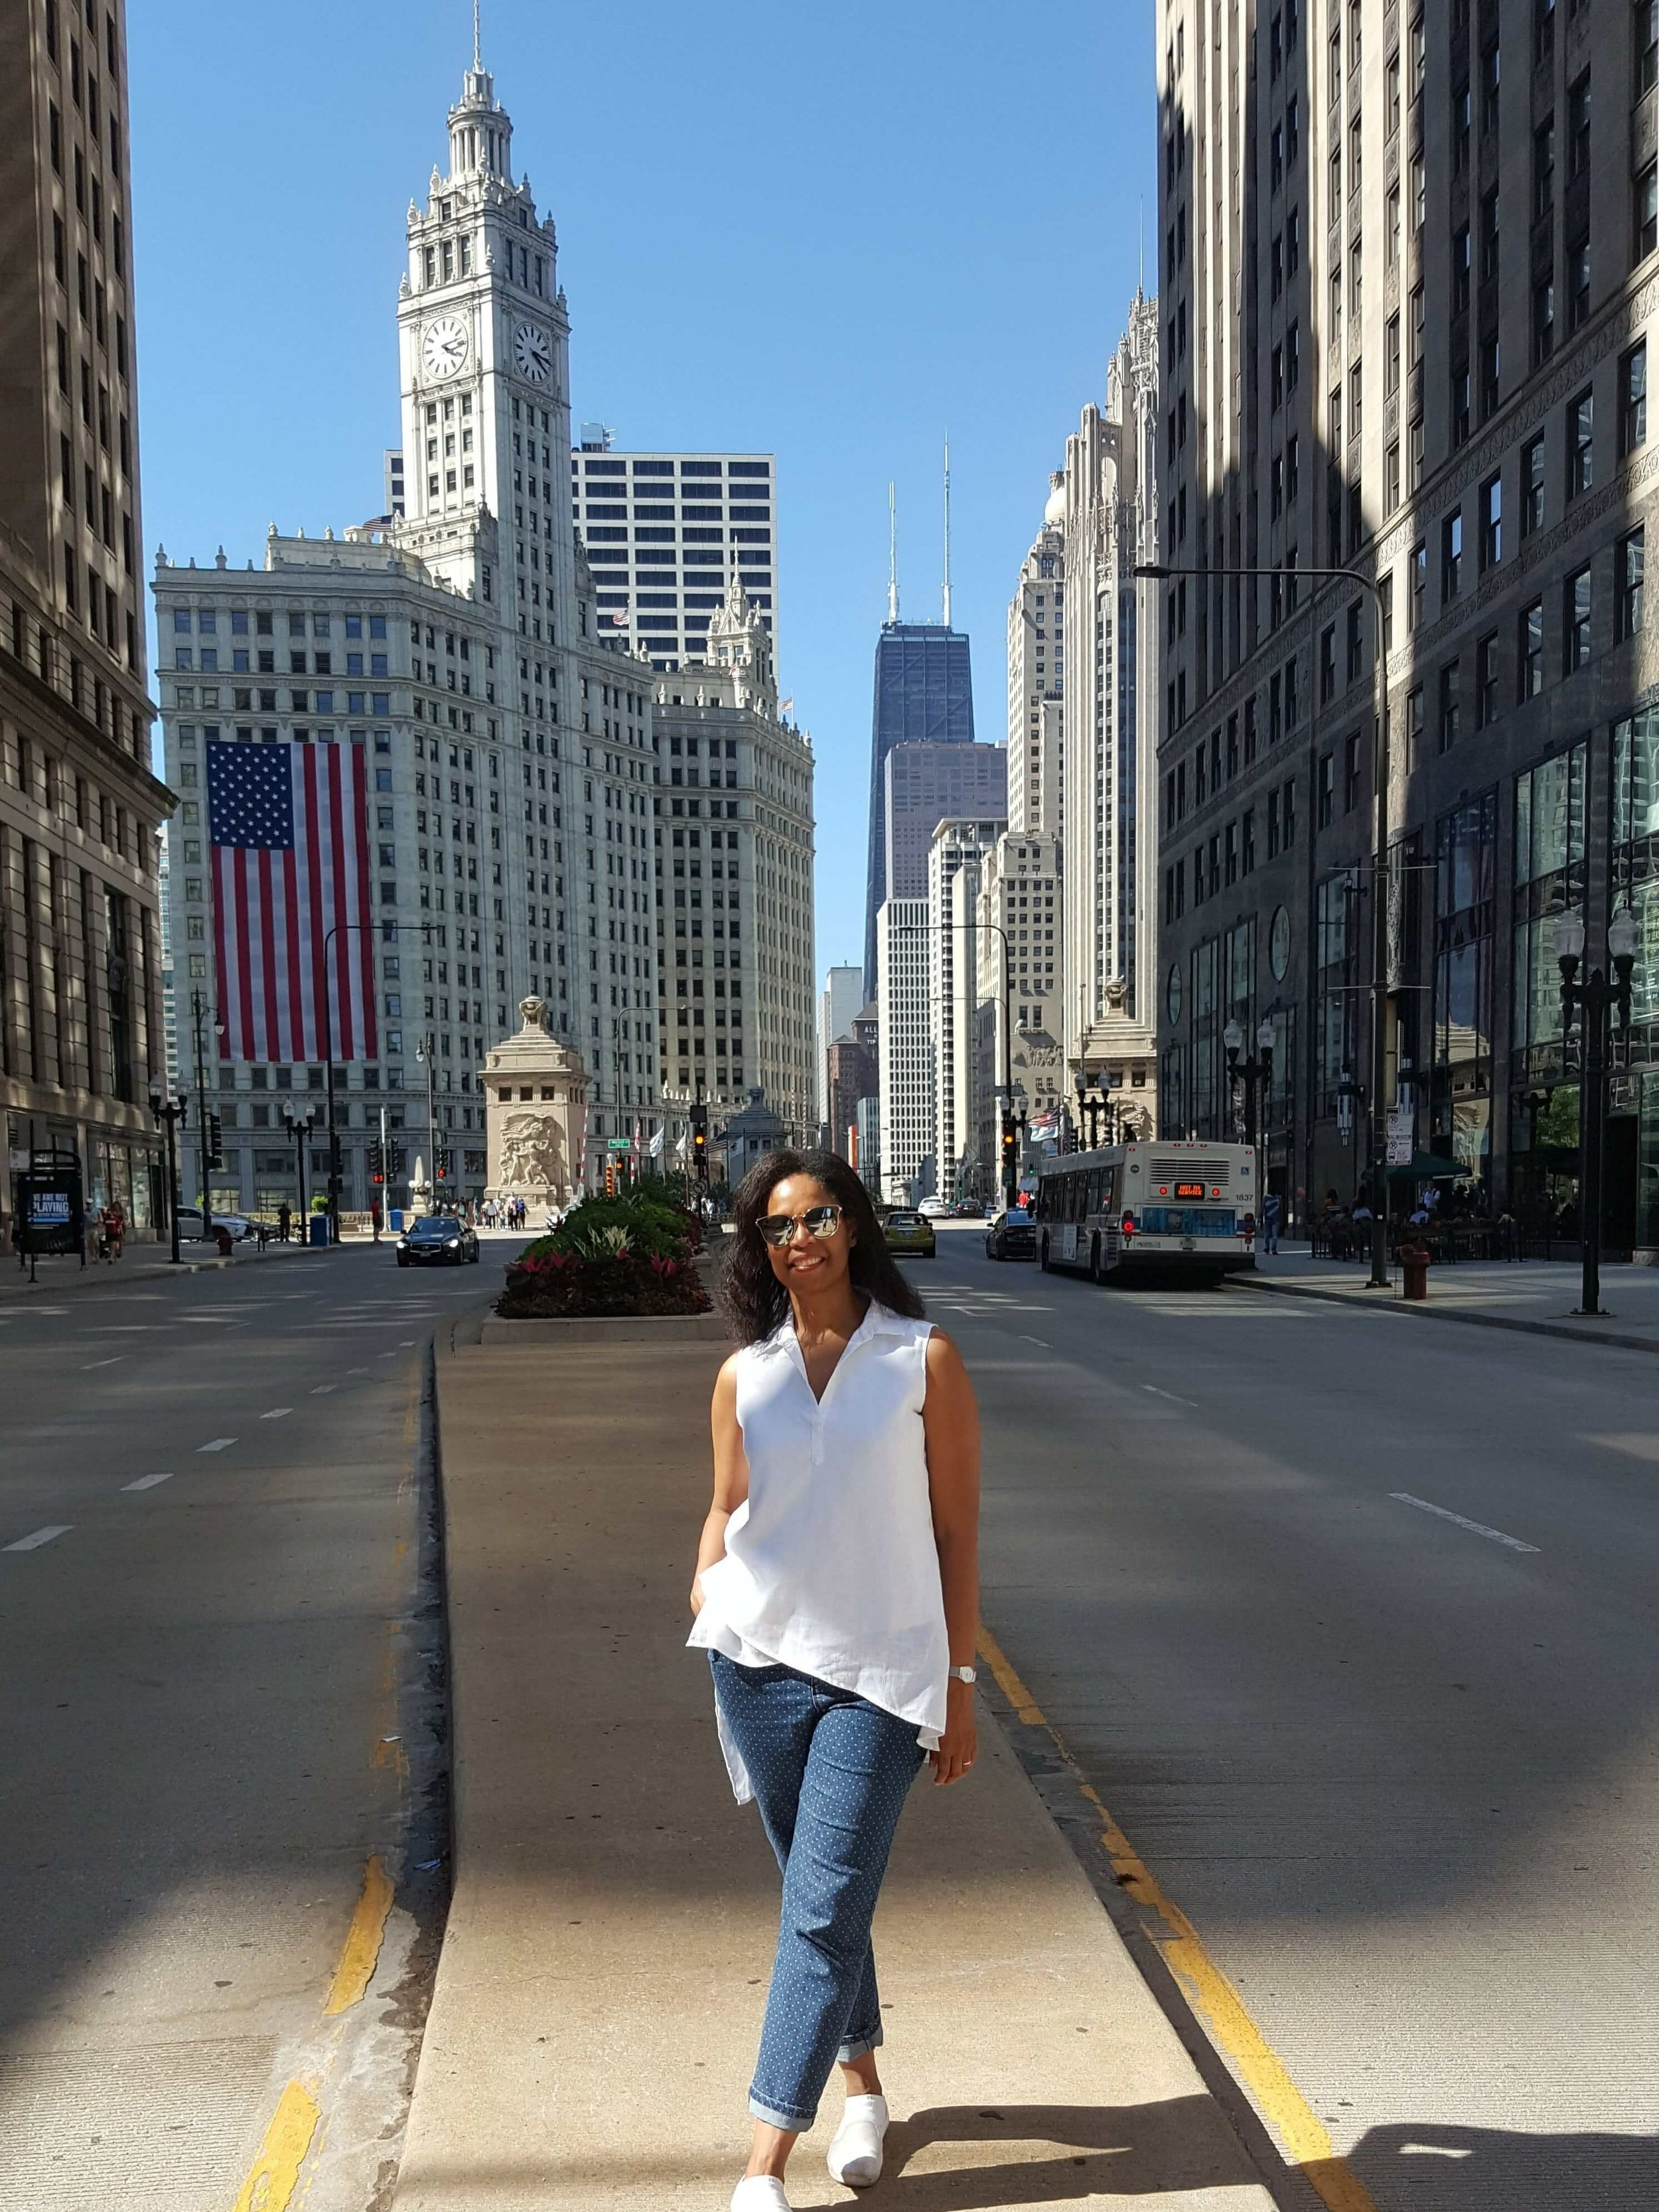 Chicago Guide to Magnificent Mile Shopping, Restaurants & Events